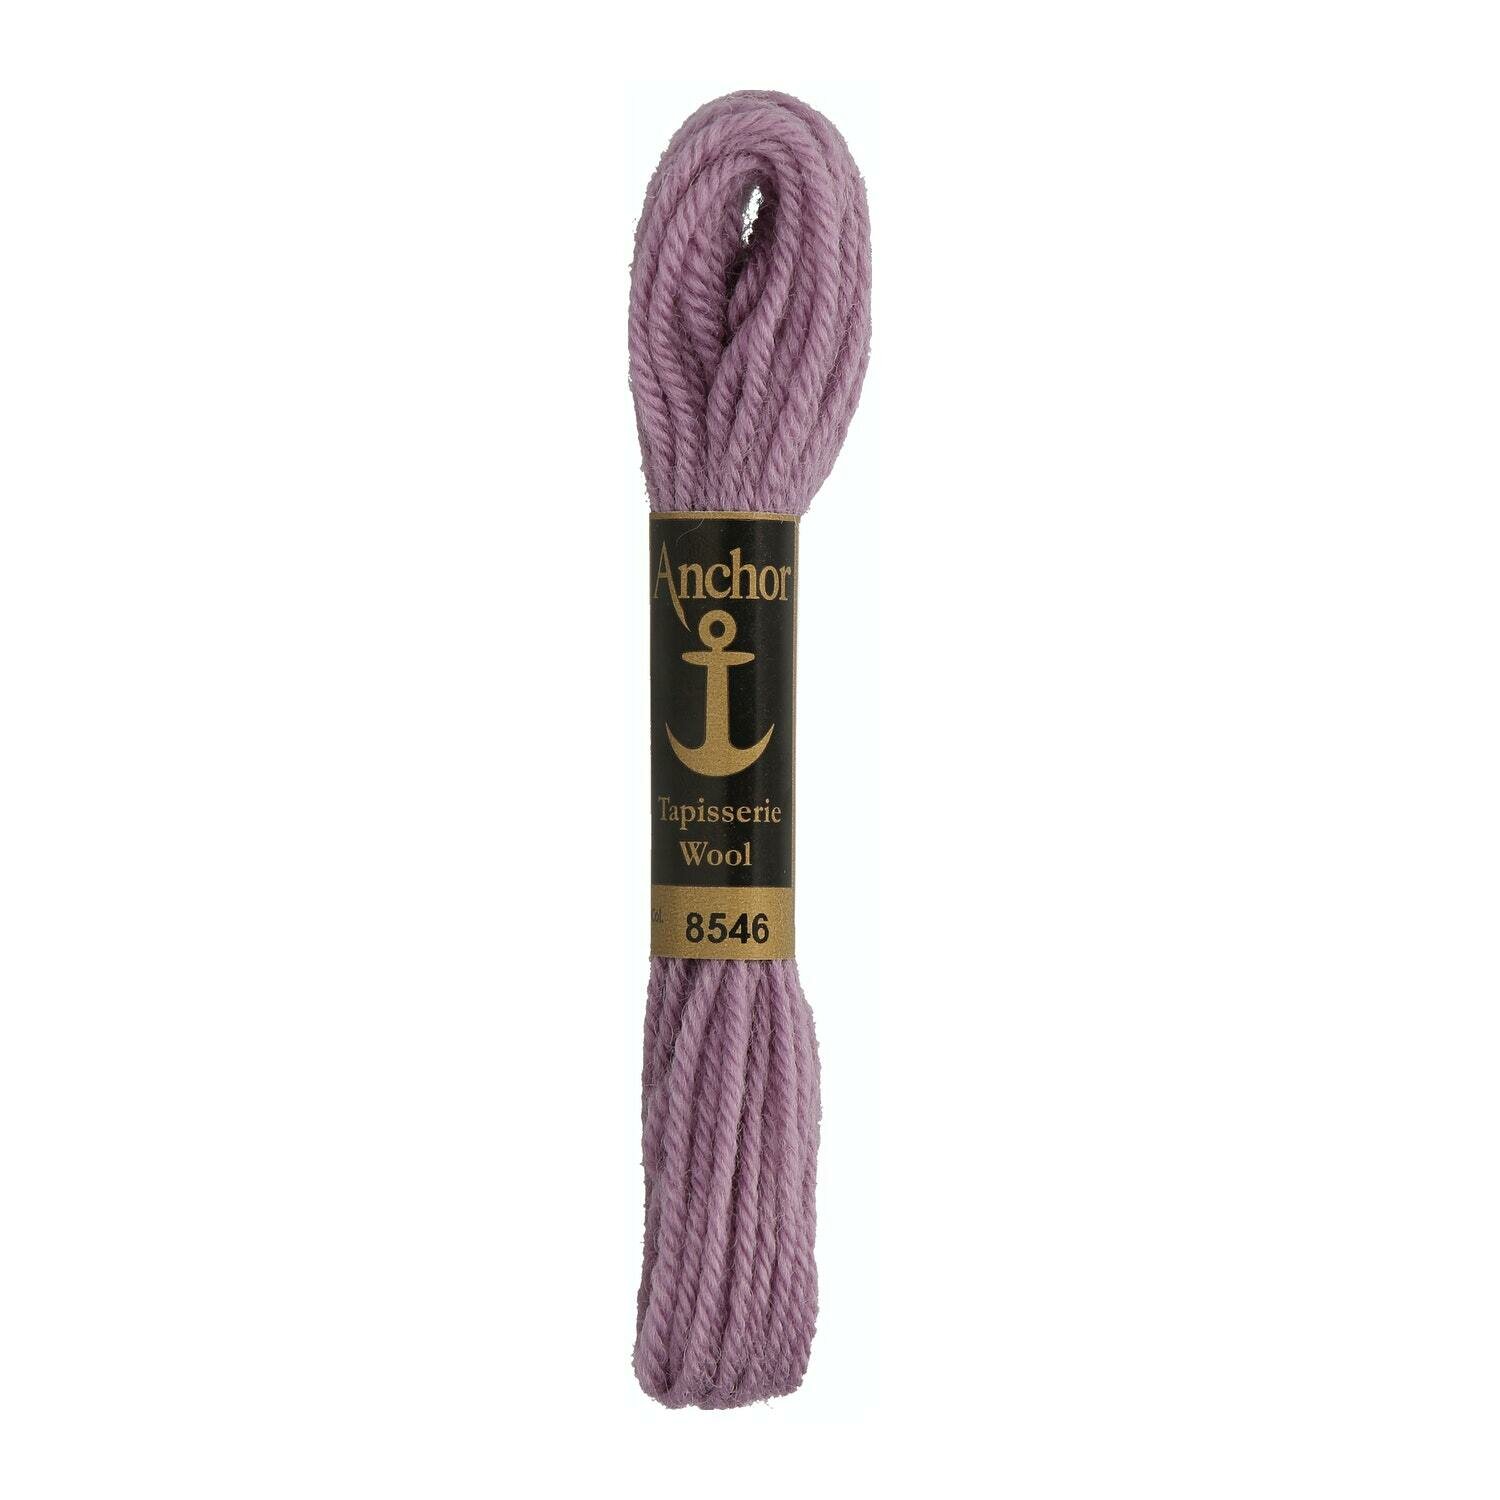 Anchor Tapisserie Wool # 08546